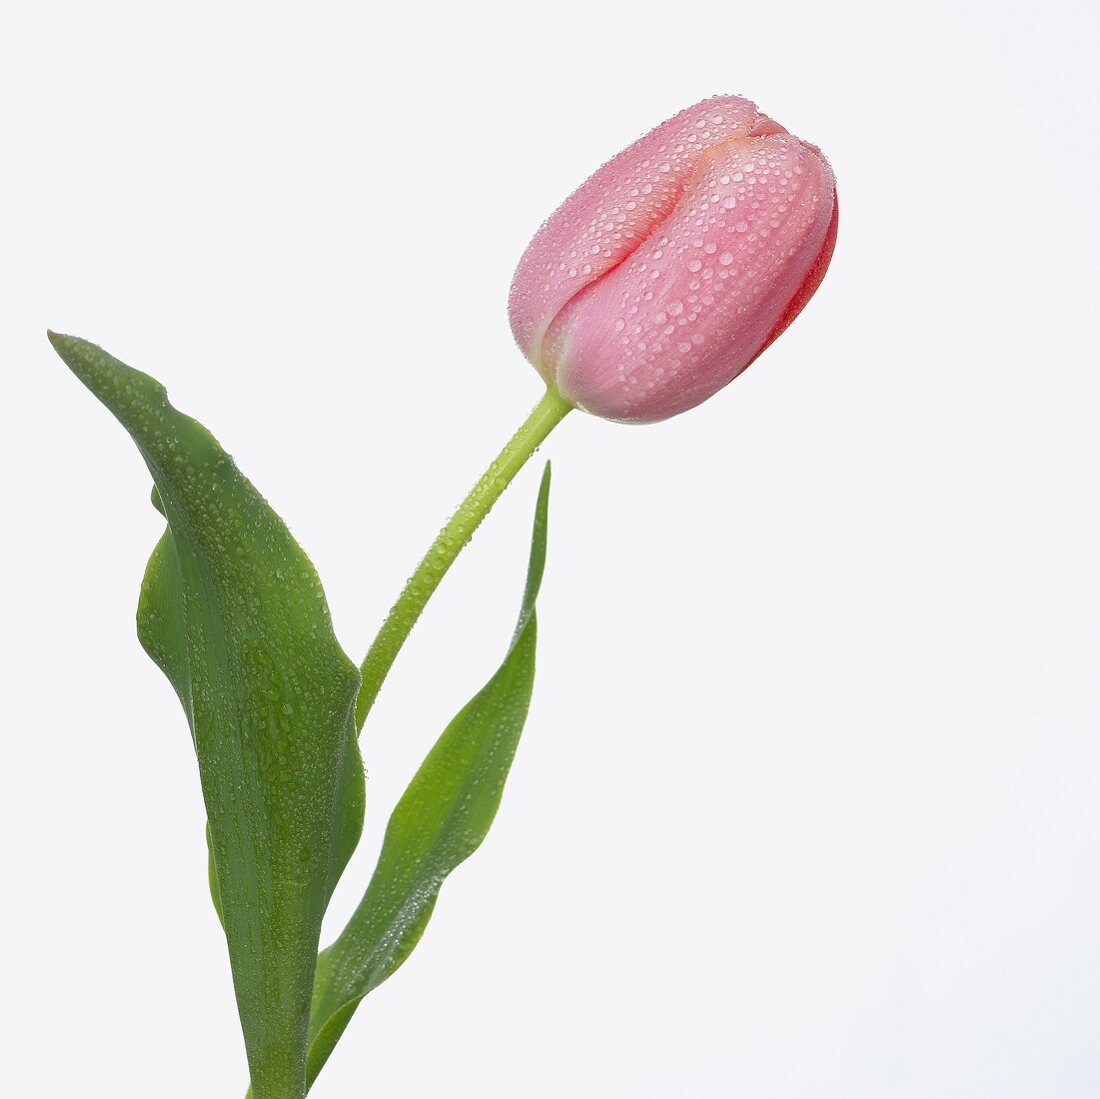 Pink tulip ('Menton') with drops of water